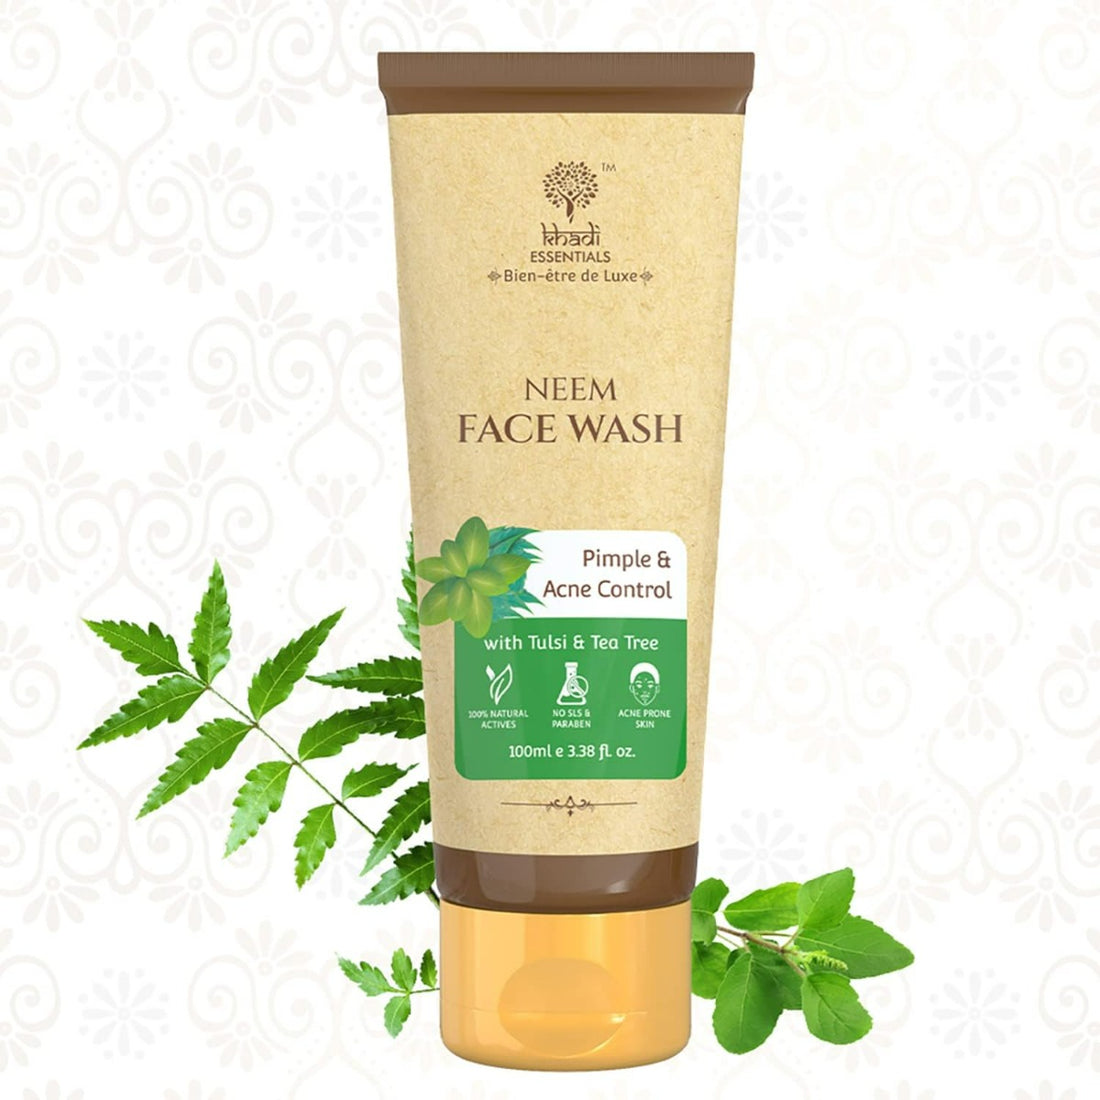 Khadi Essentials Neem Face Wash for Acne and Pimple Control (100ml)